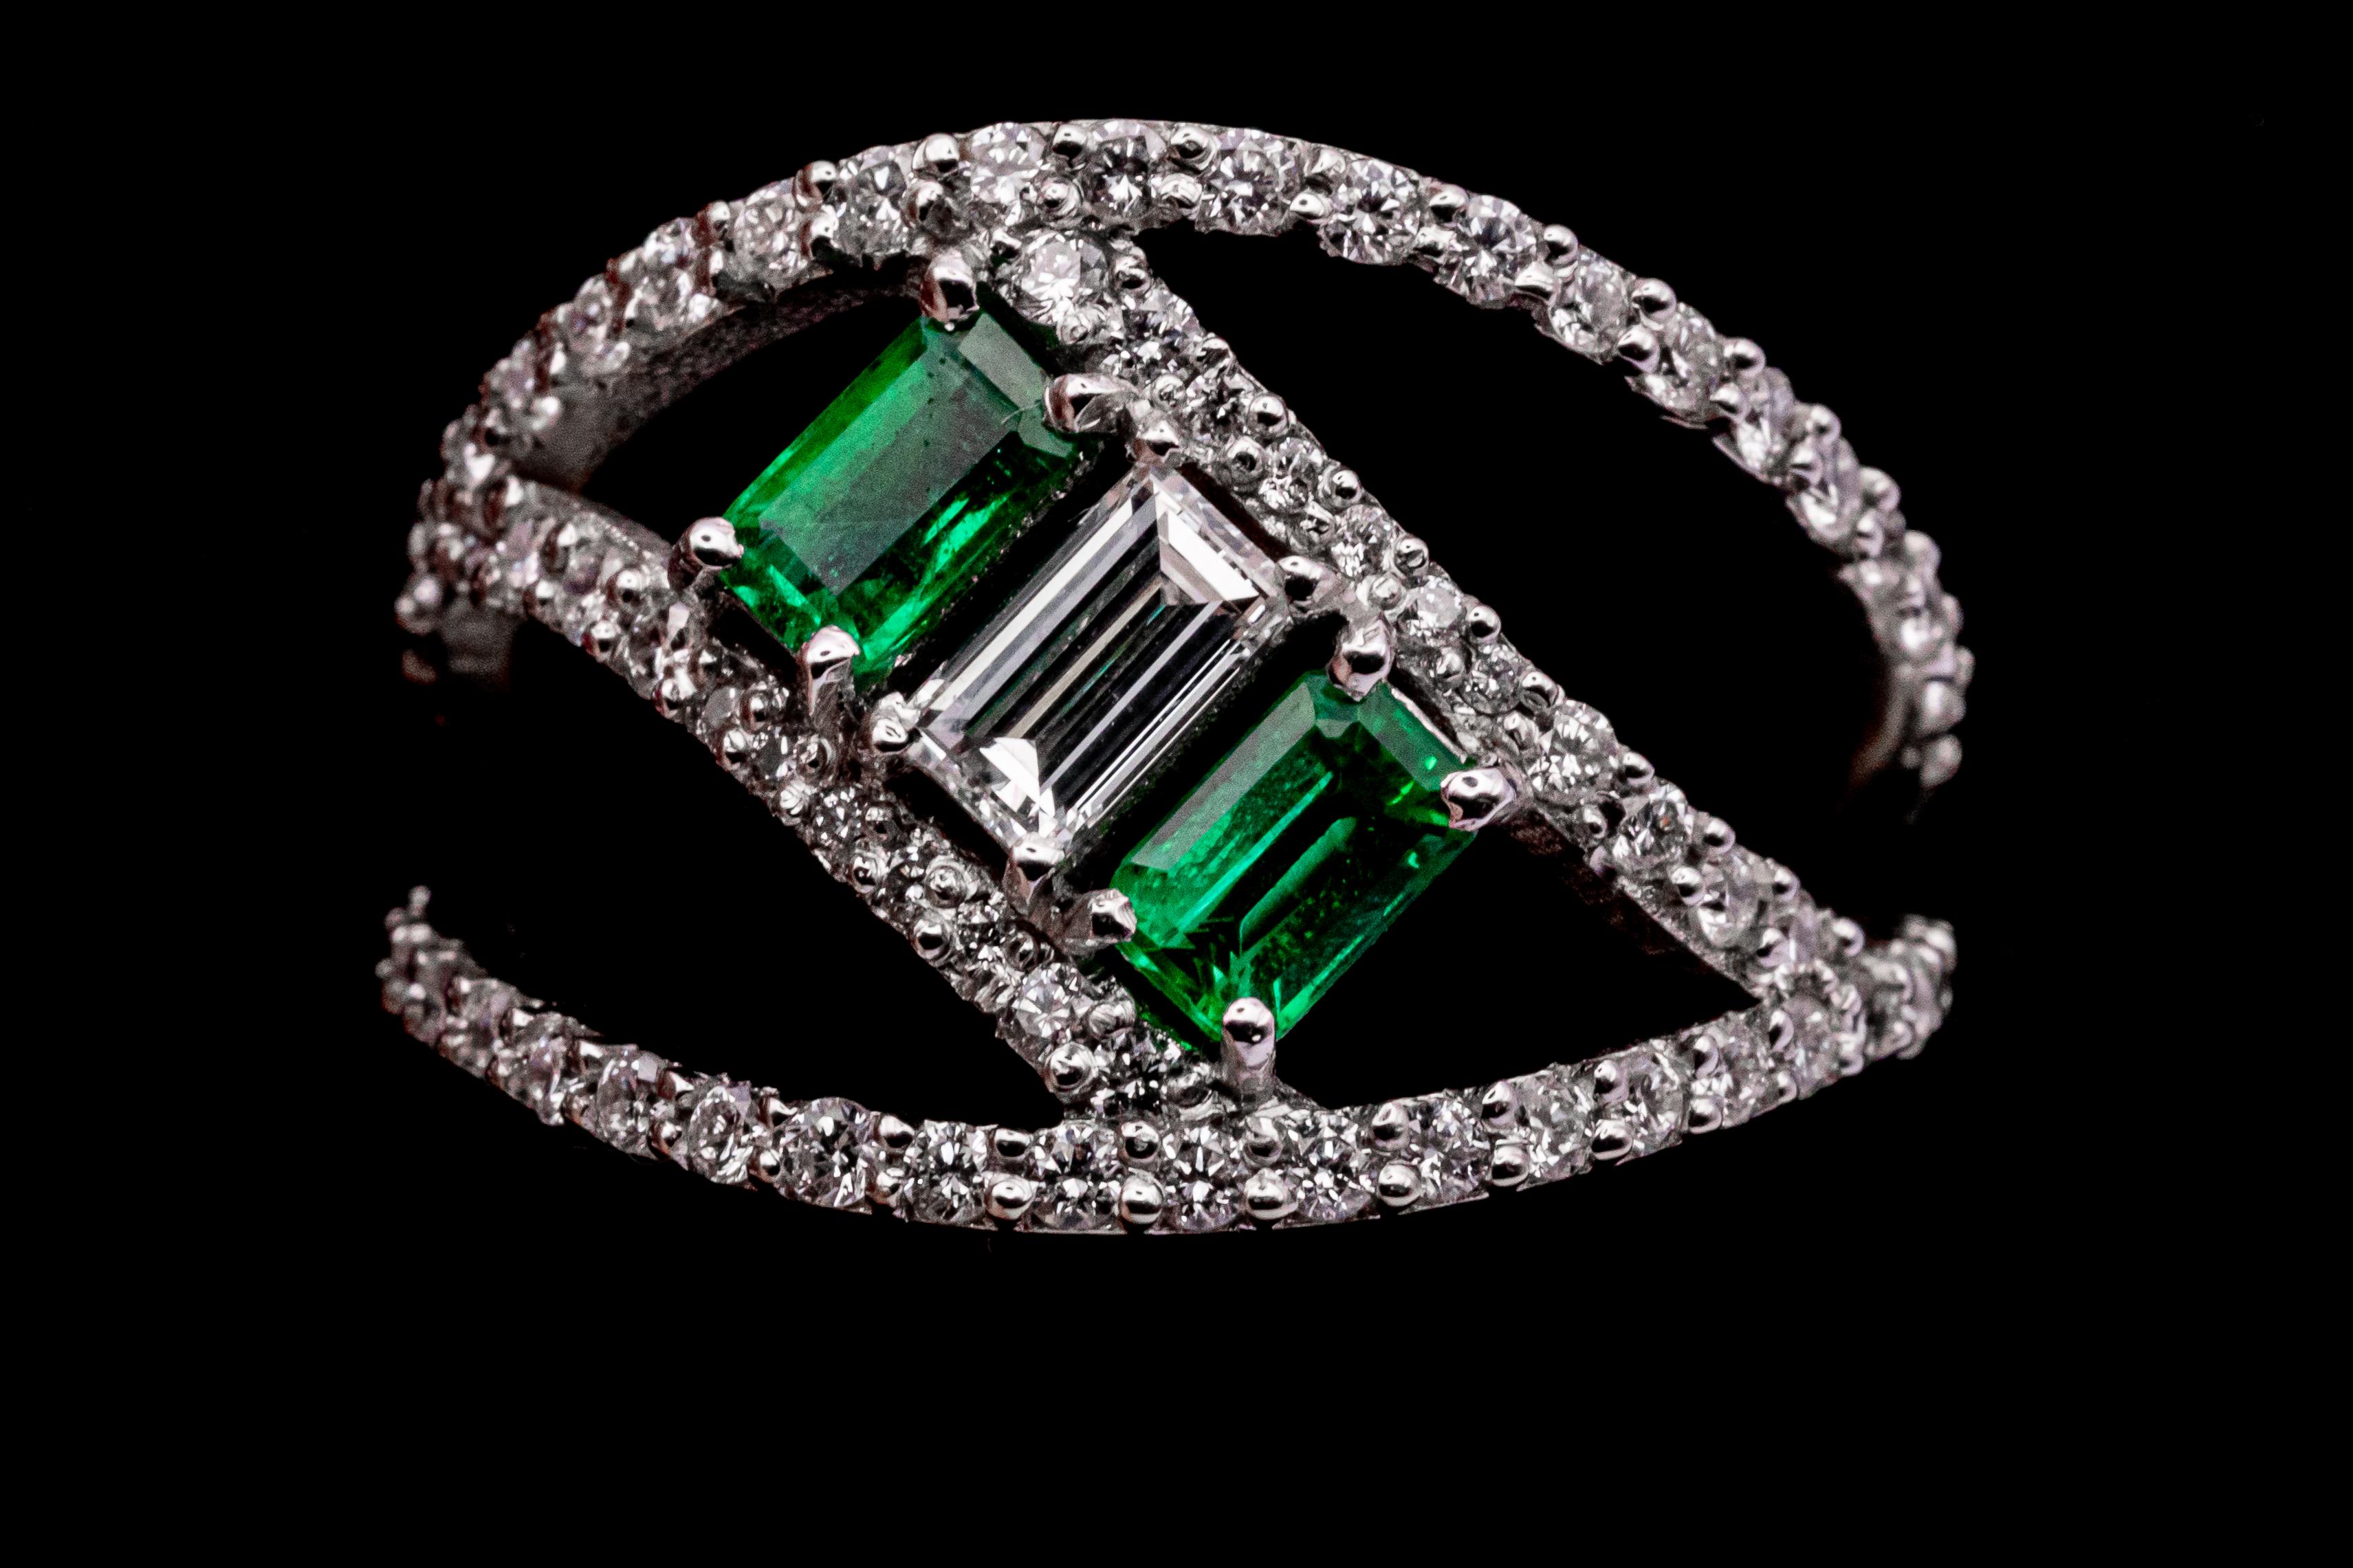 modern design 18 carat white gold ring with .27 VS G color baguette cut diamond and 2 baguette cut emeralds of .30 carat each adorned with 64 diamonds for a total of .64 carats. Gold weights 4 g.
This ring designed by Leo Milano is one of our